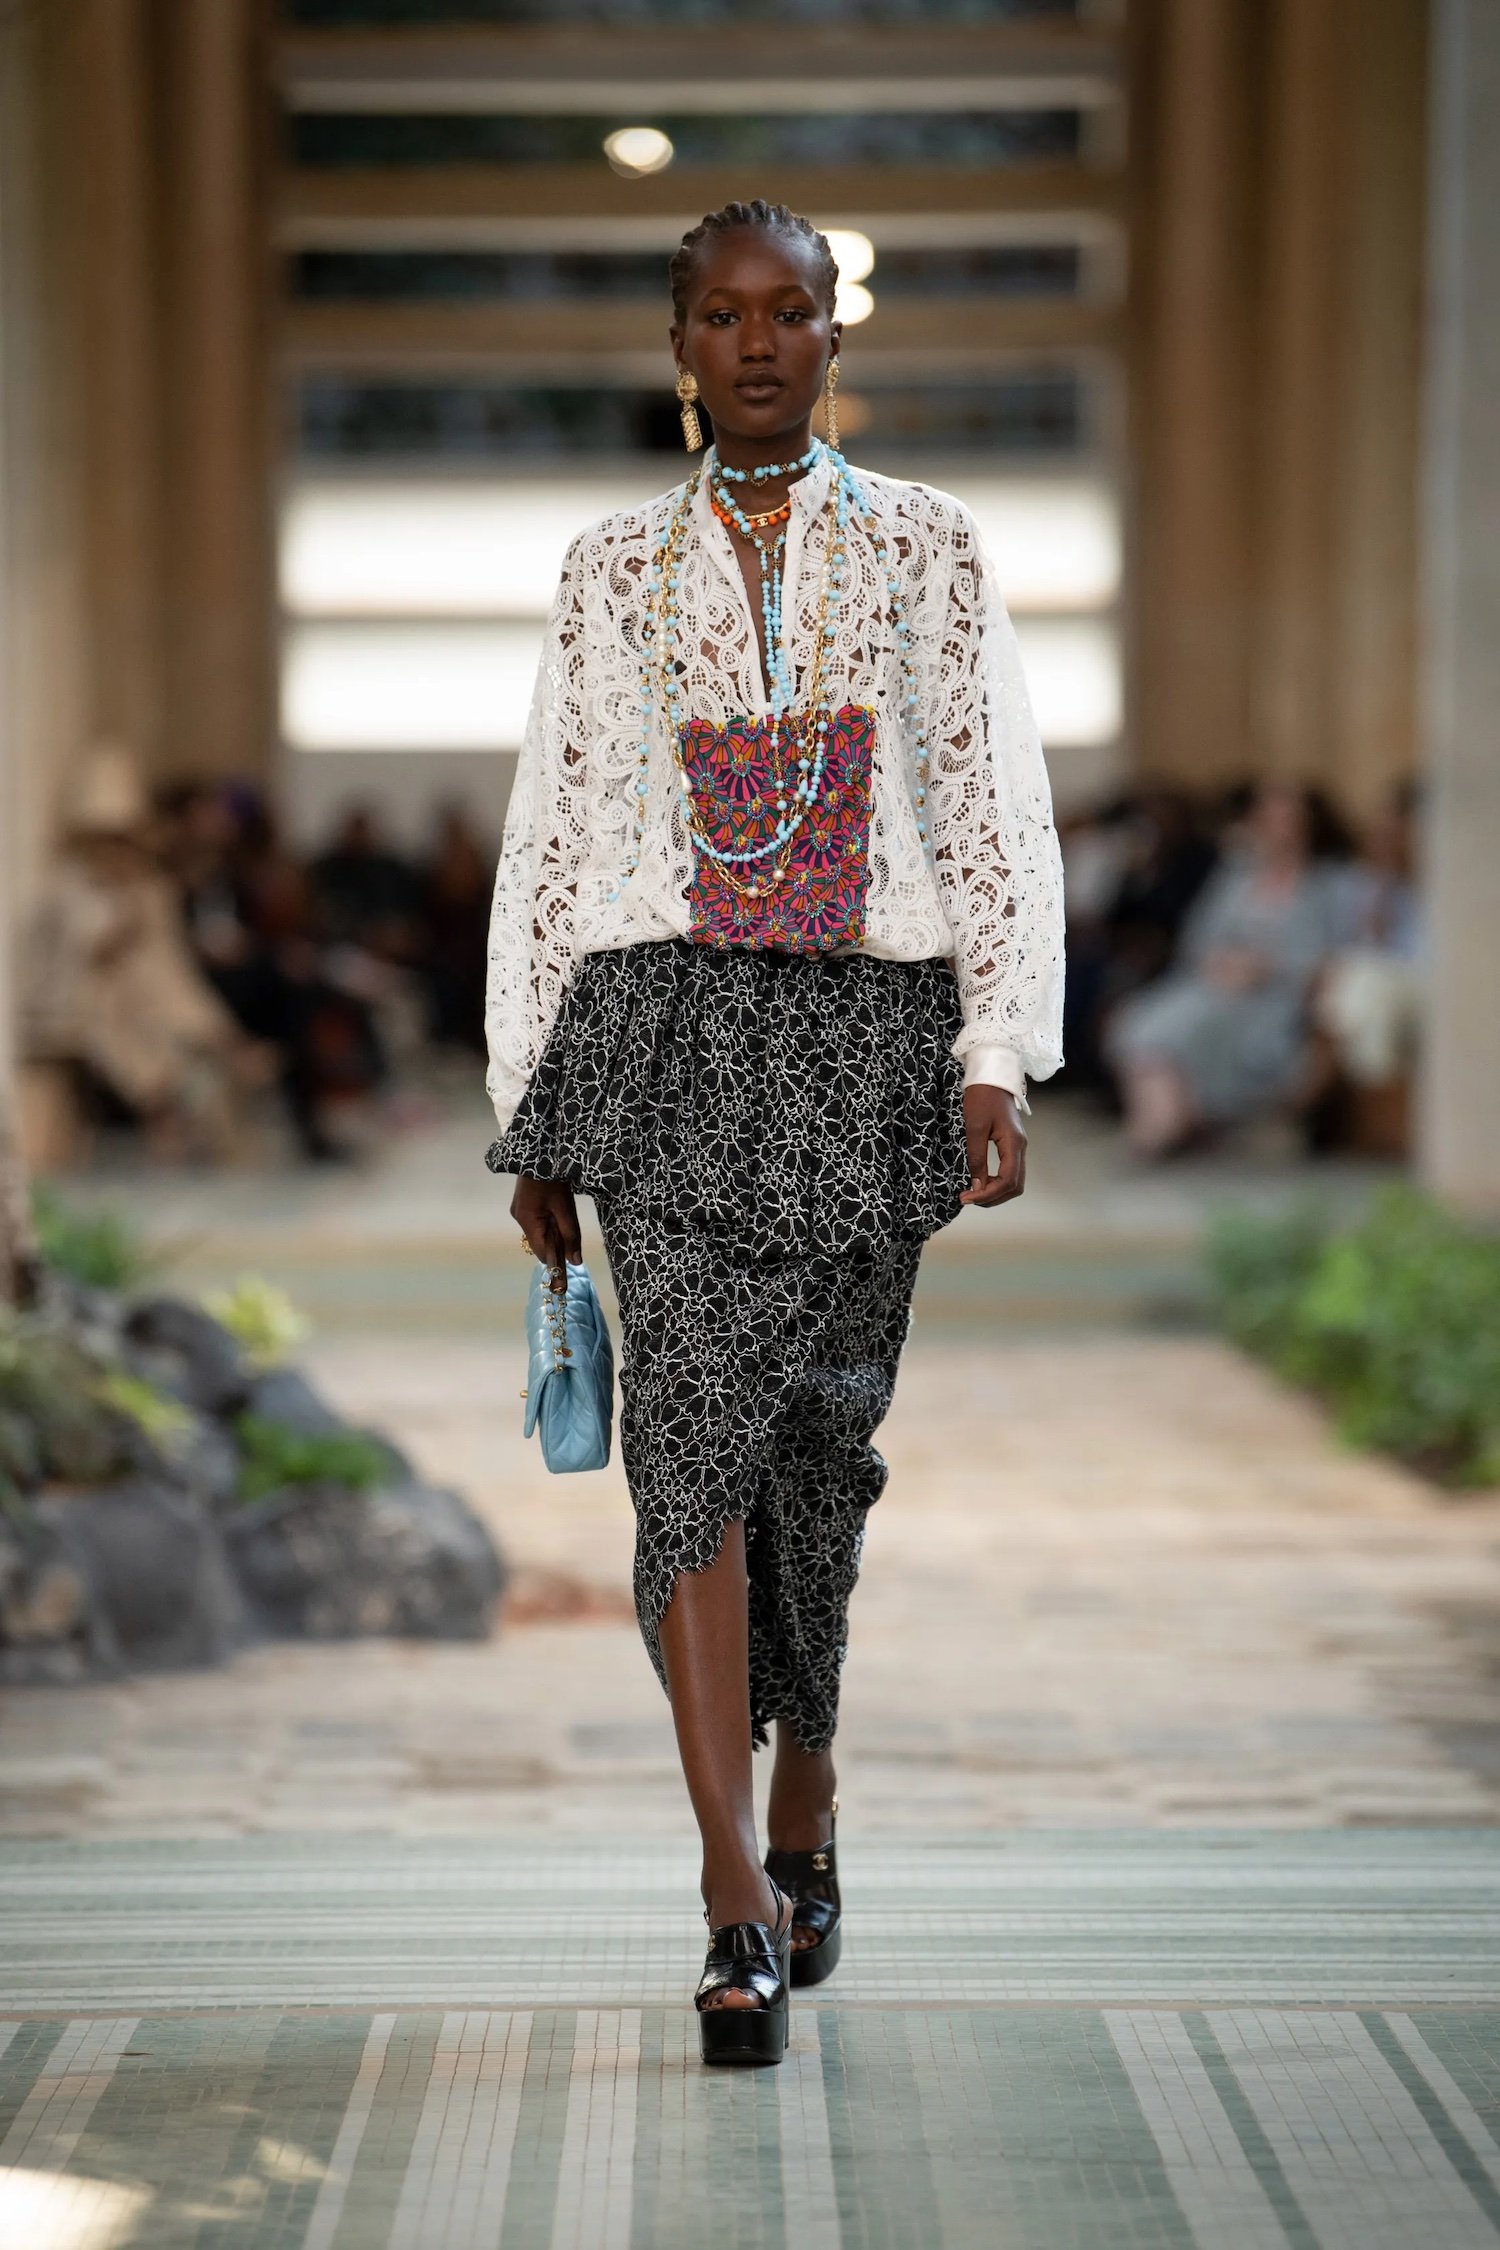 Chanel Métiers d'Art Show in Senegal Didn't Go 'Badly Wrong